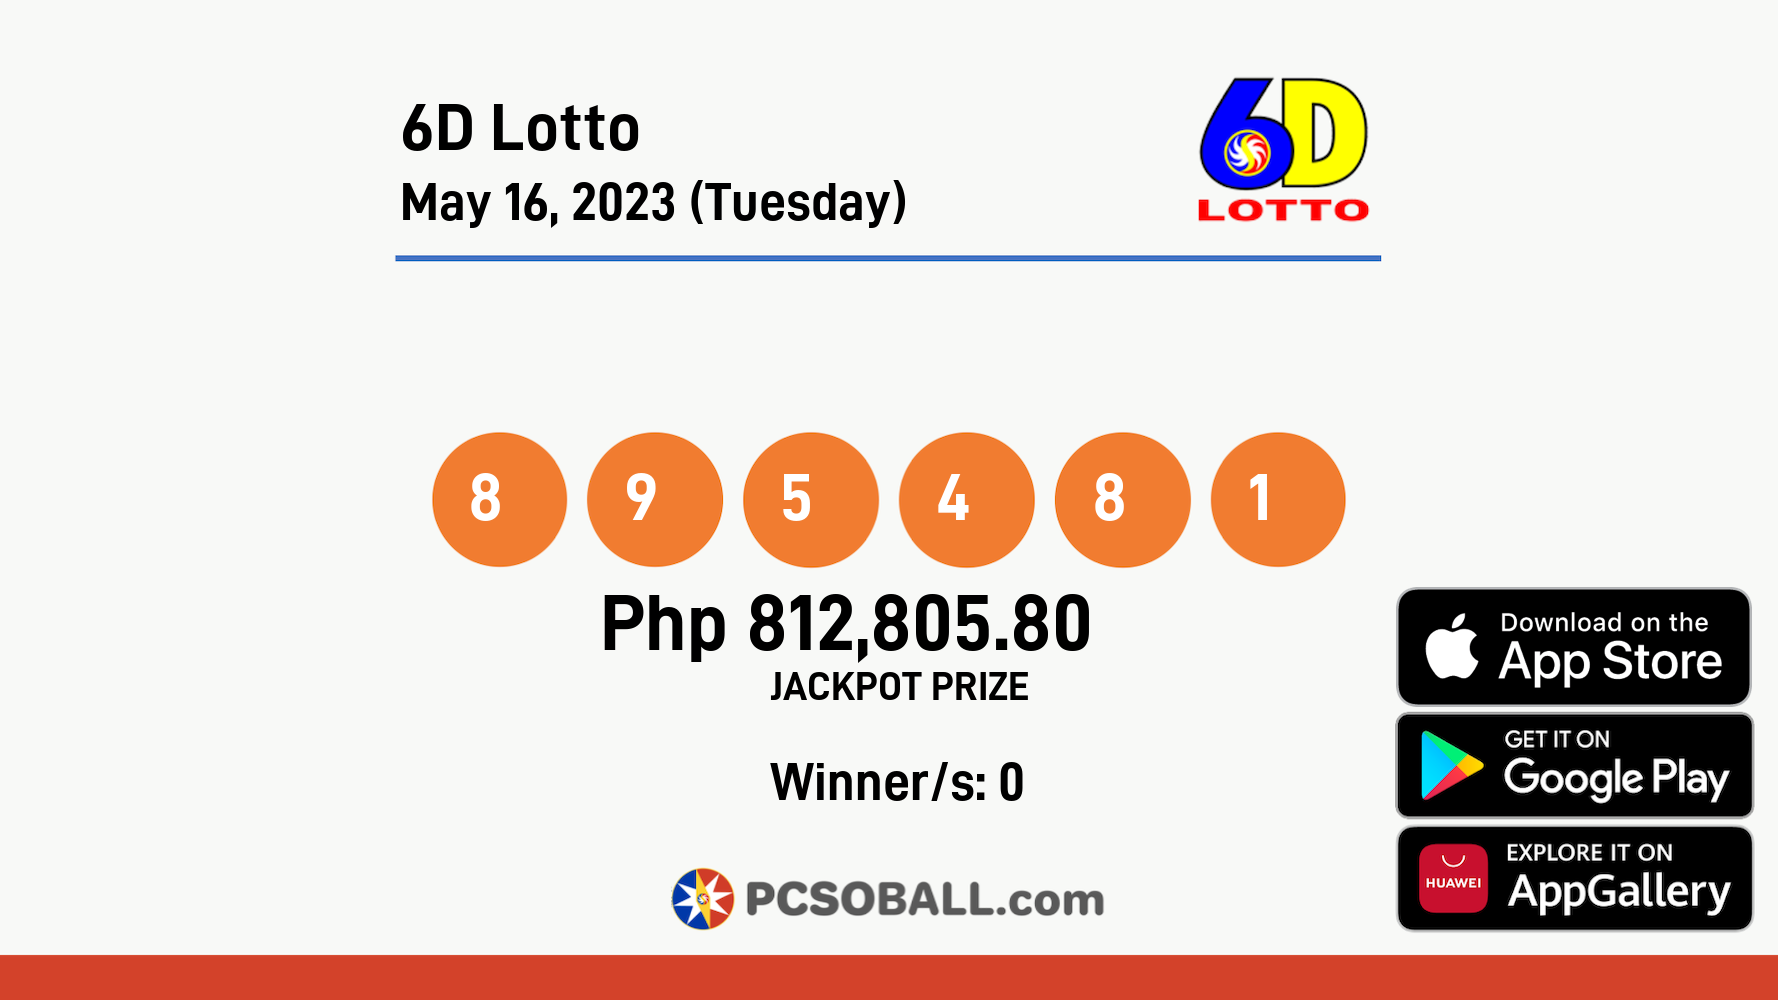 6D Lotto May 16, 2023 (Tuesday) Result